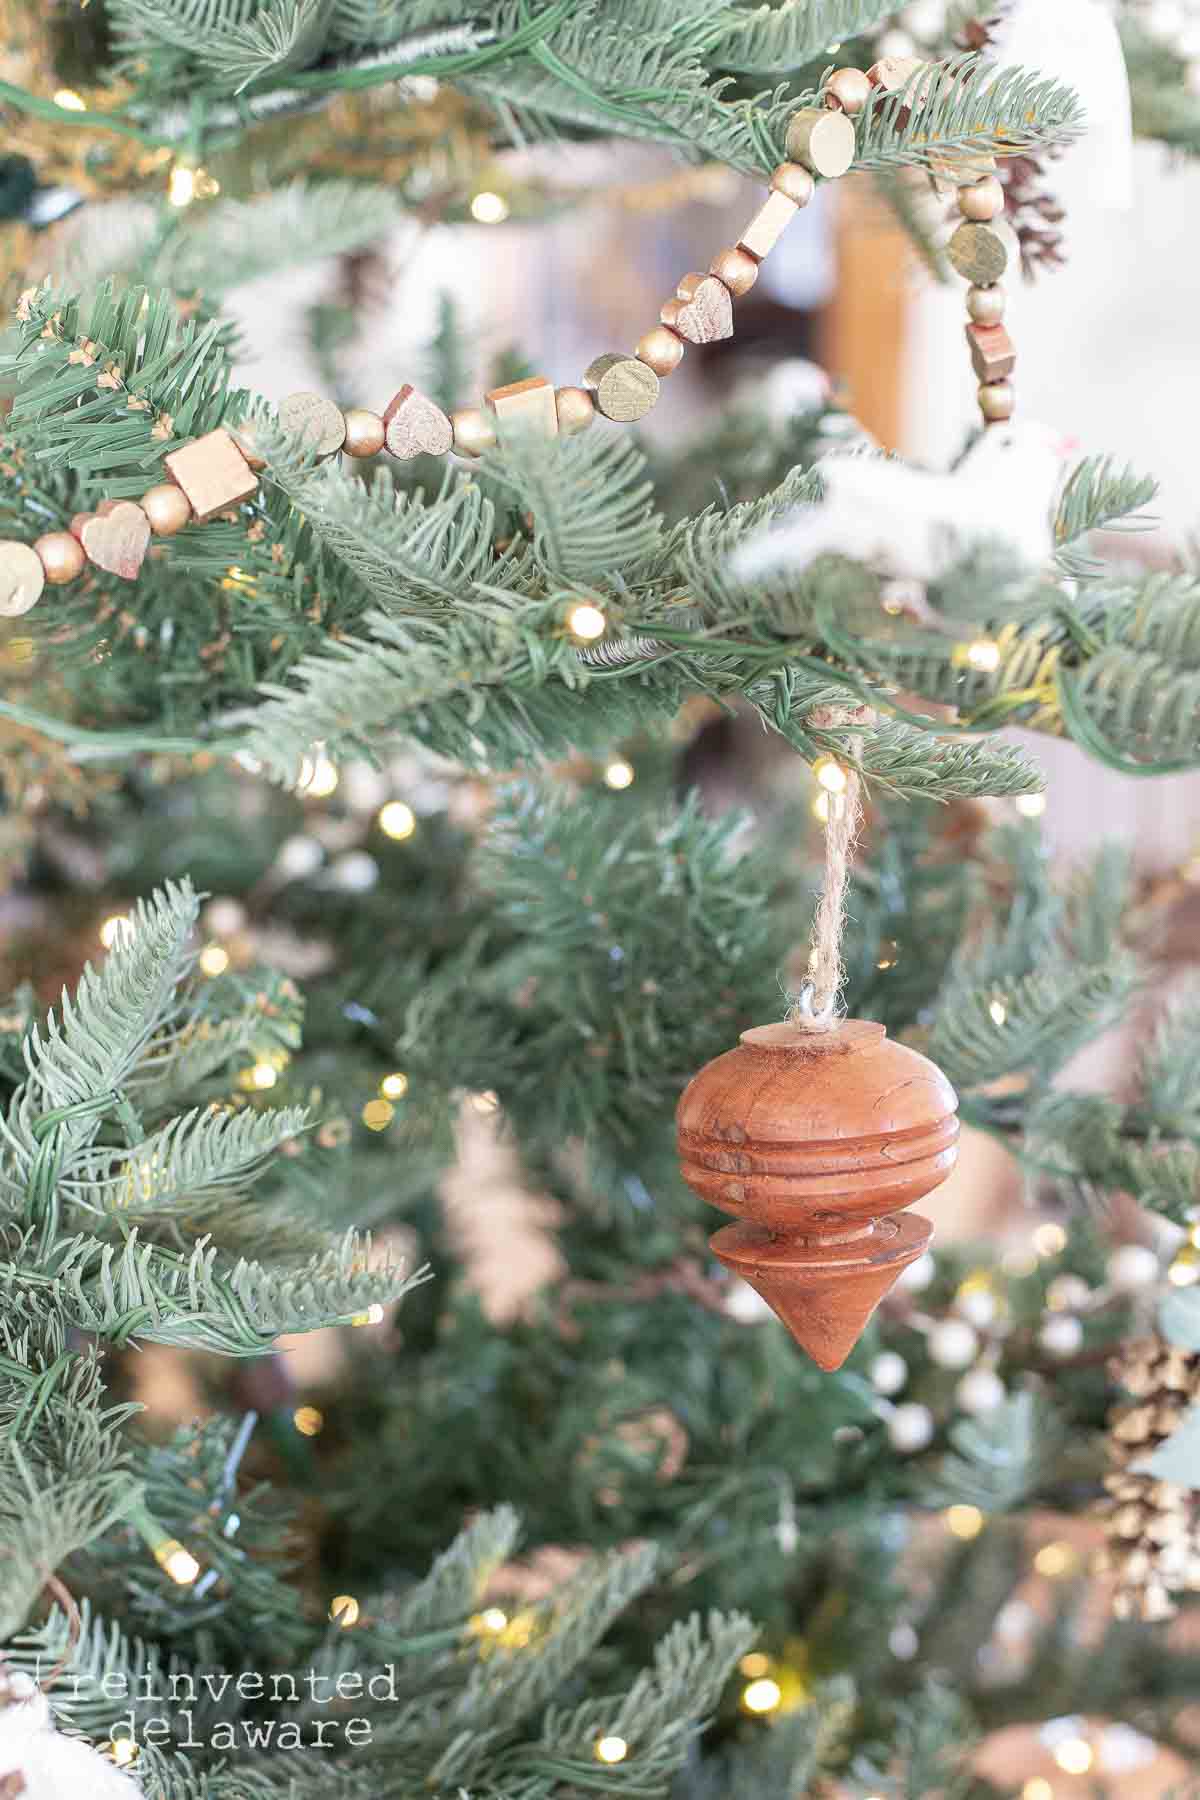 handmade wooden ornament on a simply decorated Christmas tree